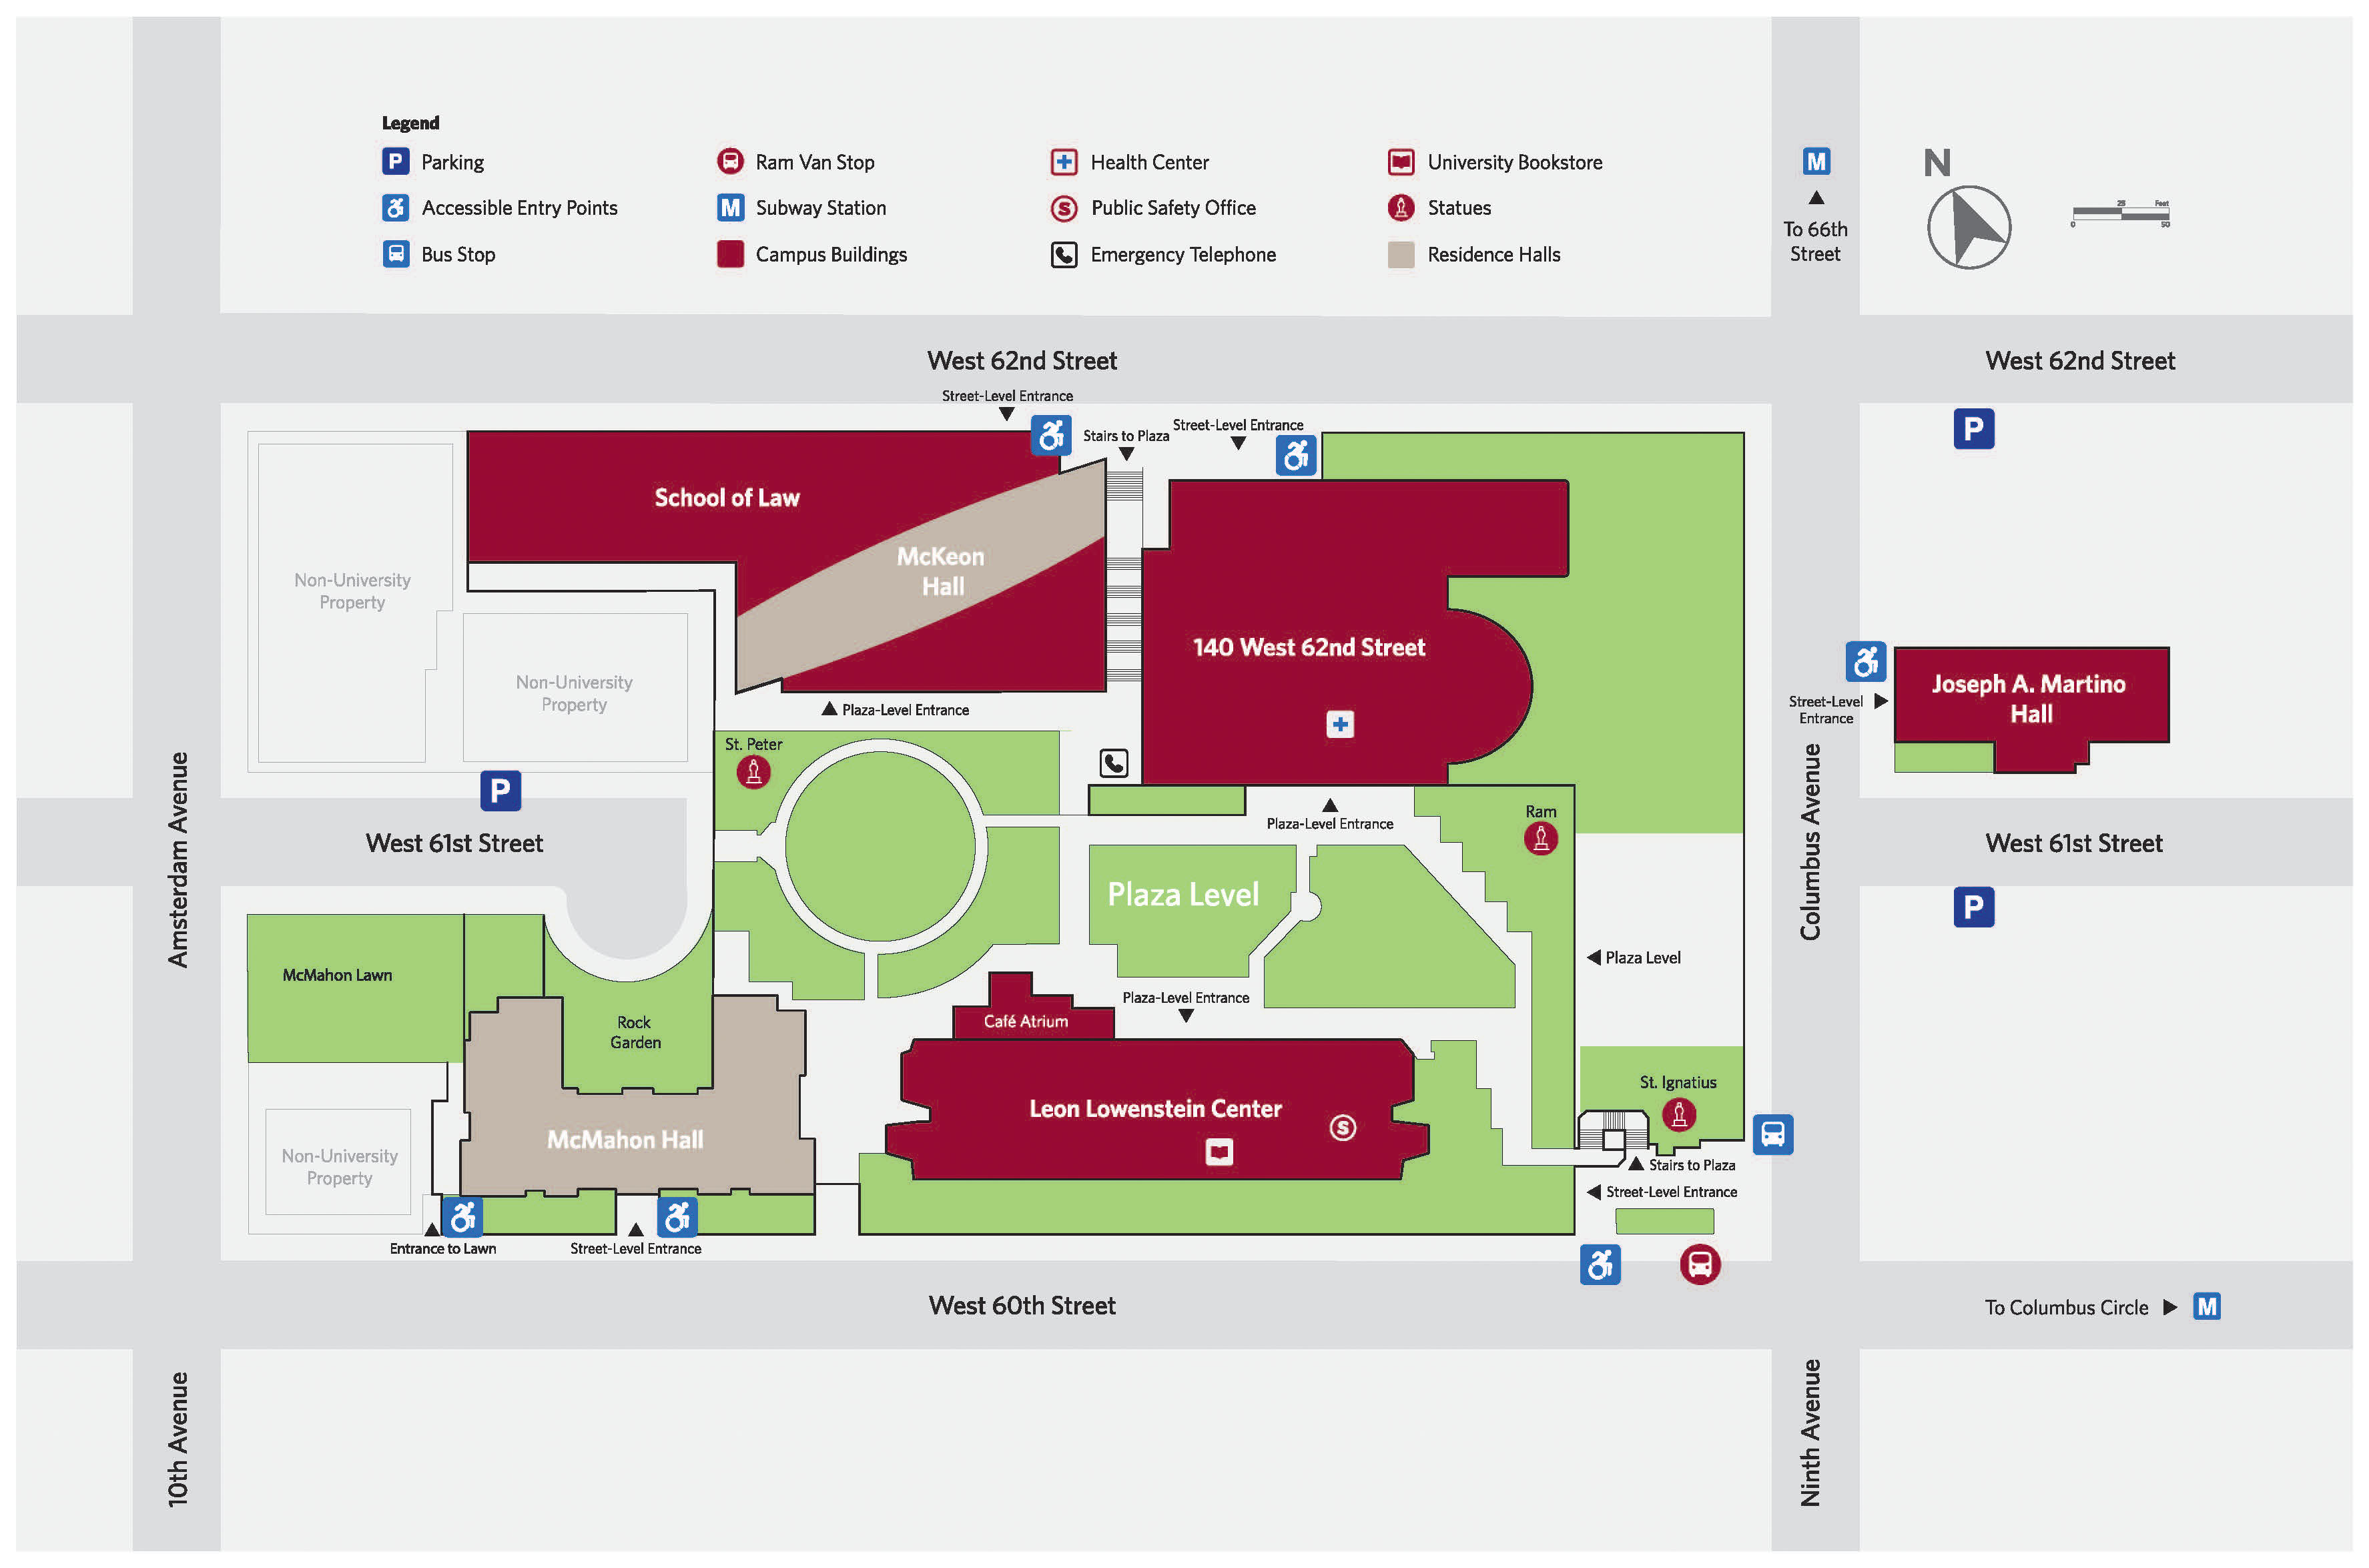 Map of Fordham's Lincoln Center campus consisting of the buildings McMahon Hall, Leon Lowenstein Center, Joseph A. Martino Hall, 140 West 62nd Street, McKeon Hall, and the School of Law. Outdoor locations include McMahon Lawn, the Rock Garden, and Leon Lowenstein Plaza. Indication of Parking, Accessible Entry Points, Bus Stop, Ram Van Stop, Subway Stations, Campus Buildings, Health Center, Public